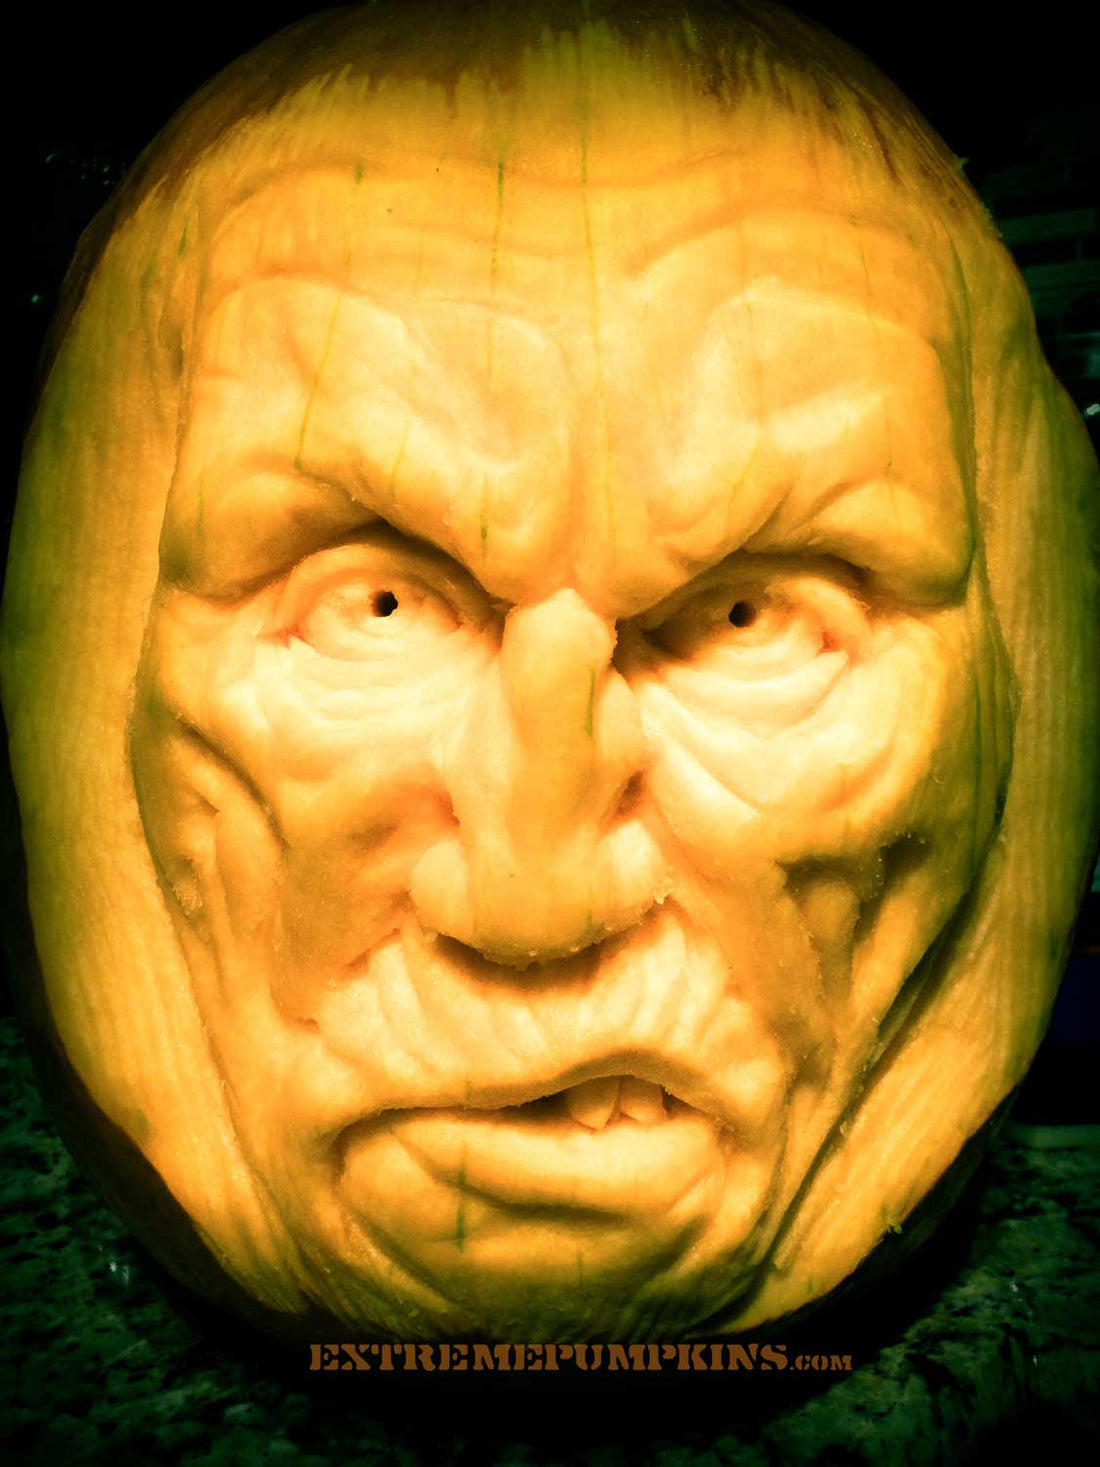 The Angry Guy Pumpkin Sculpture